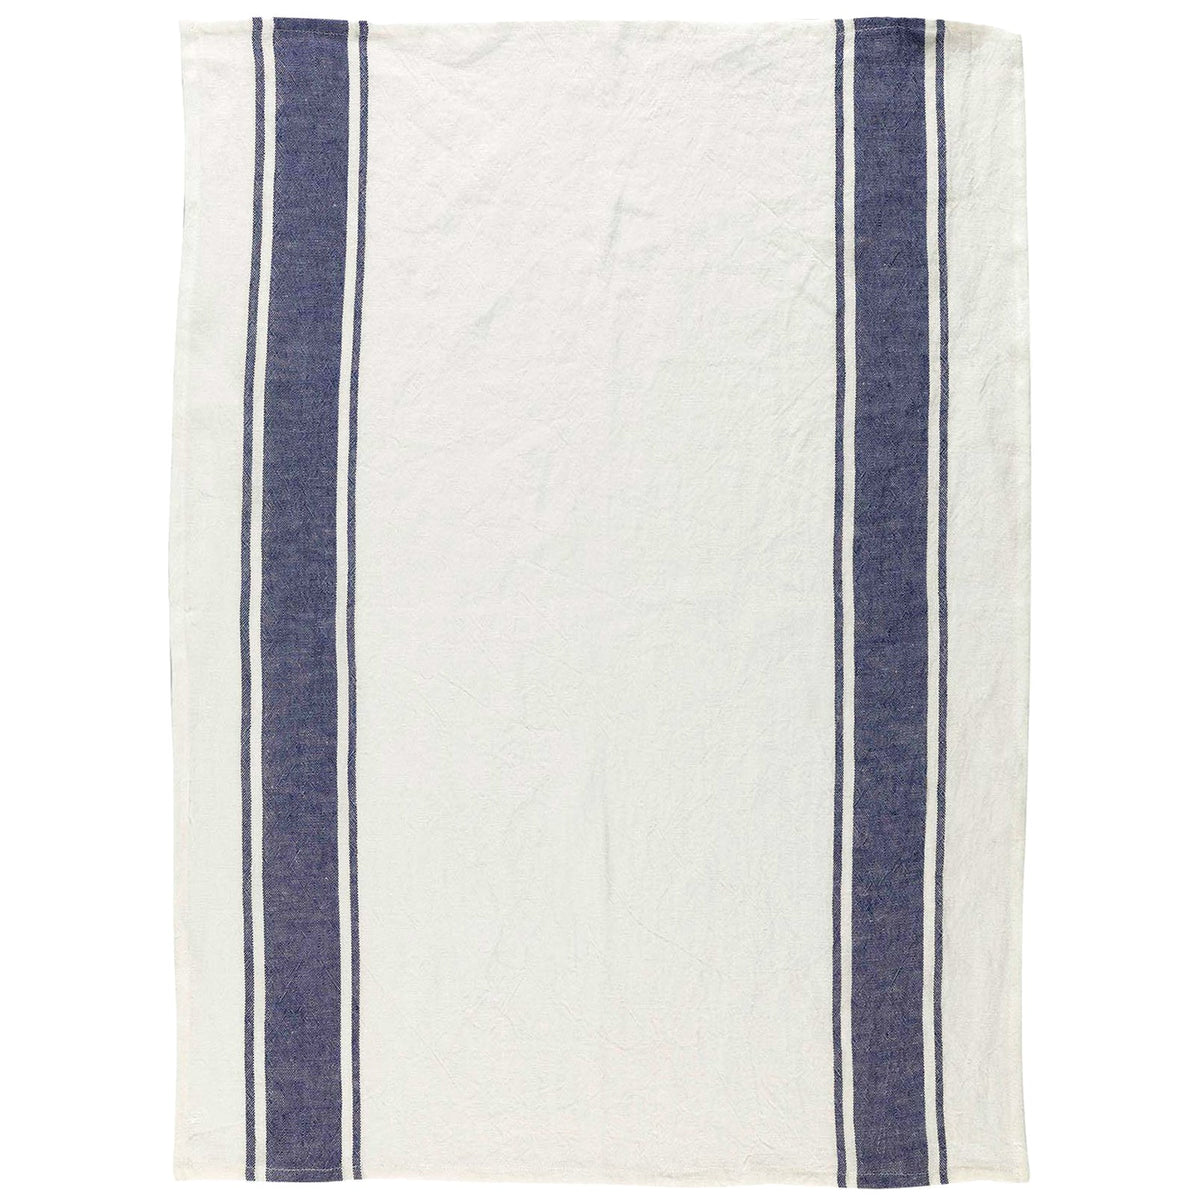 Trattoria Blue Kitchen Towel Large Border Stripes sold as part of a mixed set of 2 in Italian Linen from Caskata